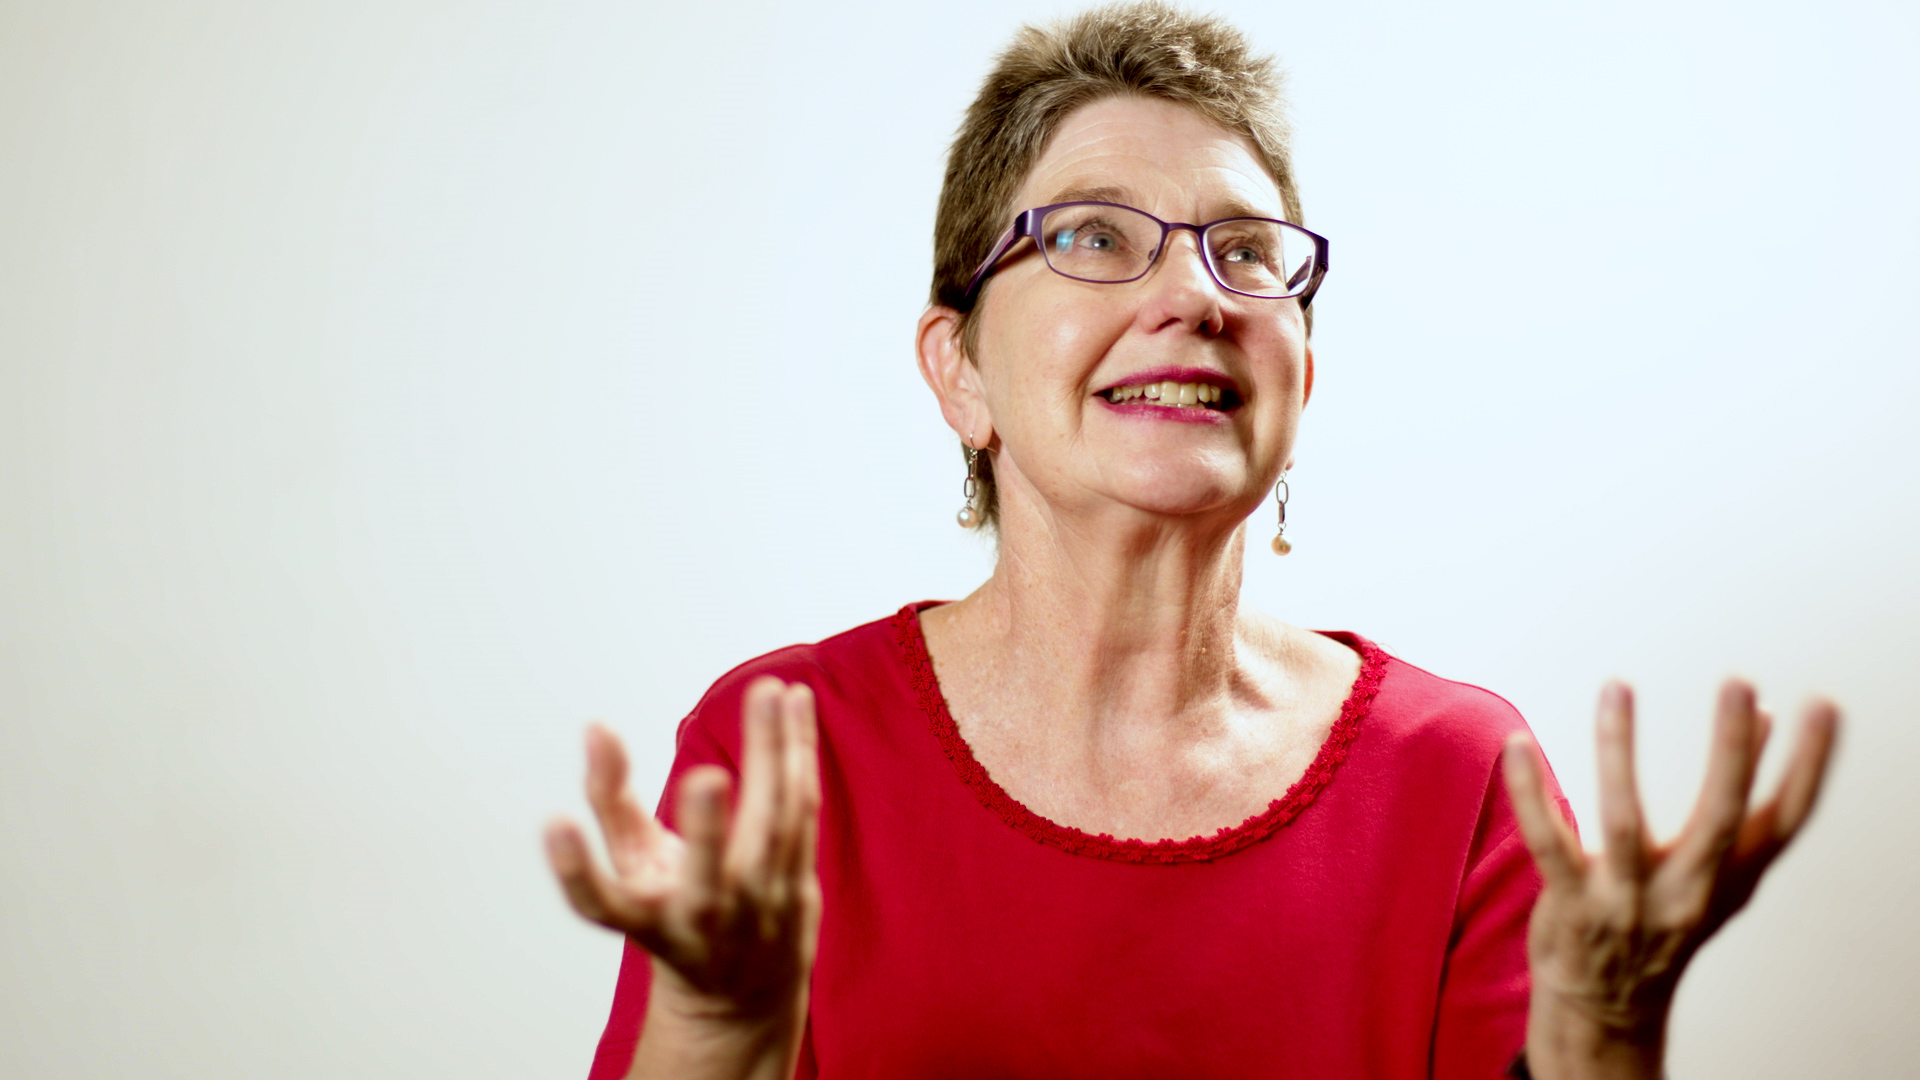 A lady wearing a red shirt and glasses with her hands open gesturing.